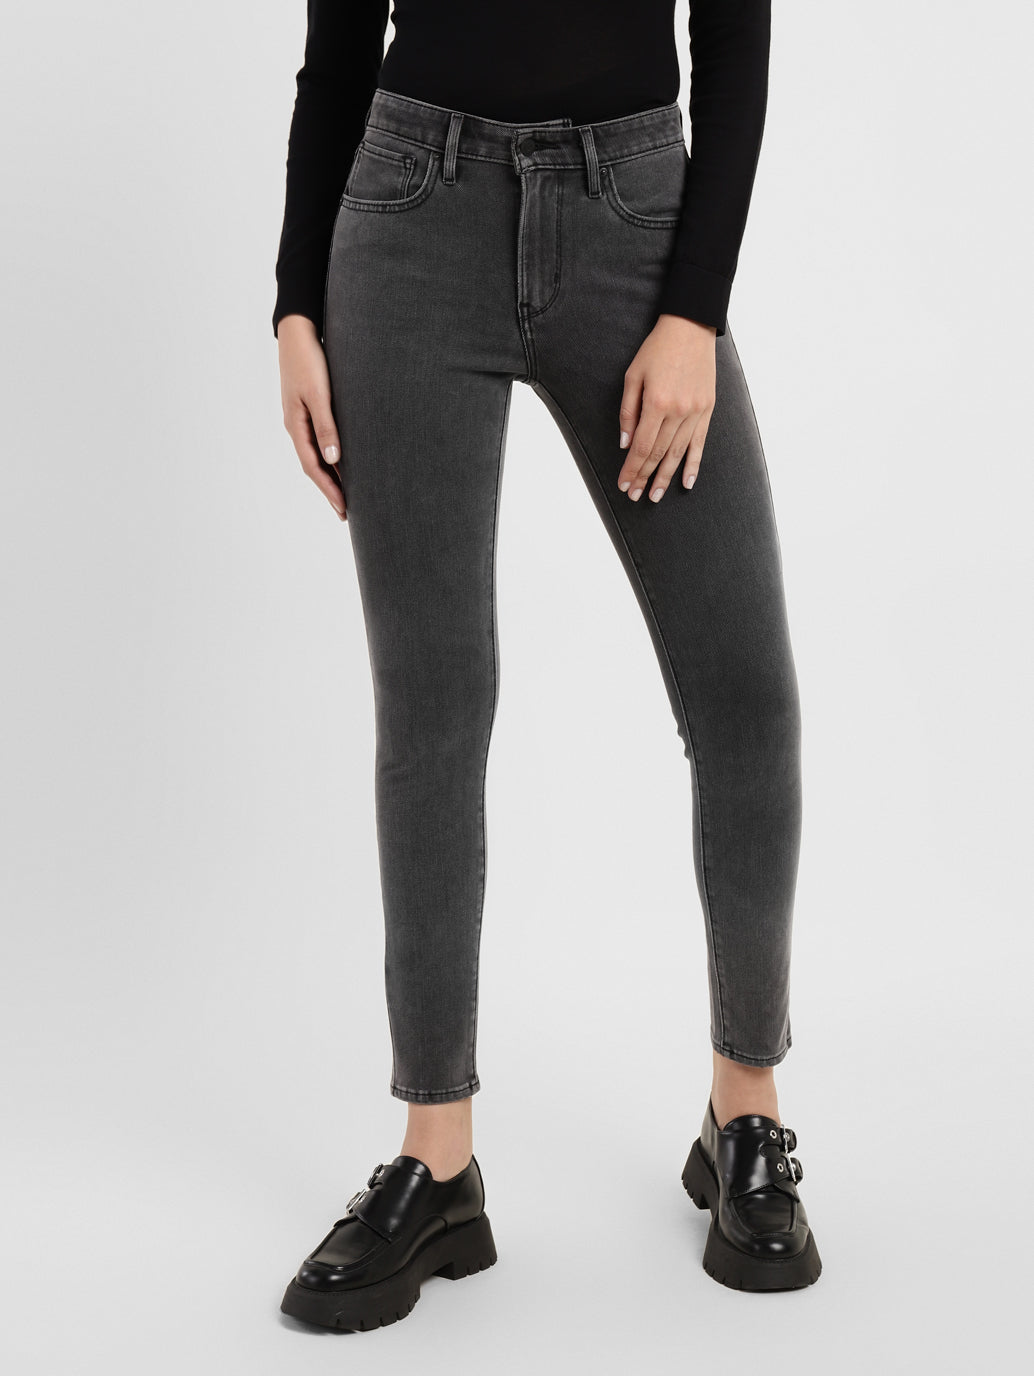 Ladies Skinny Jeans, Button, High Rise at Rs 425/piece in Mumbai